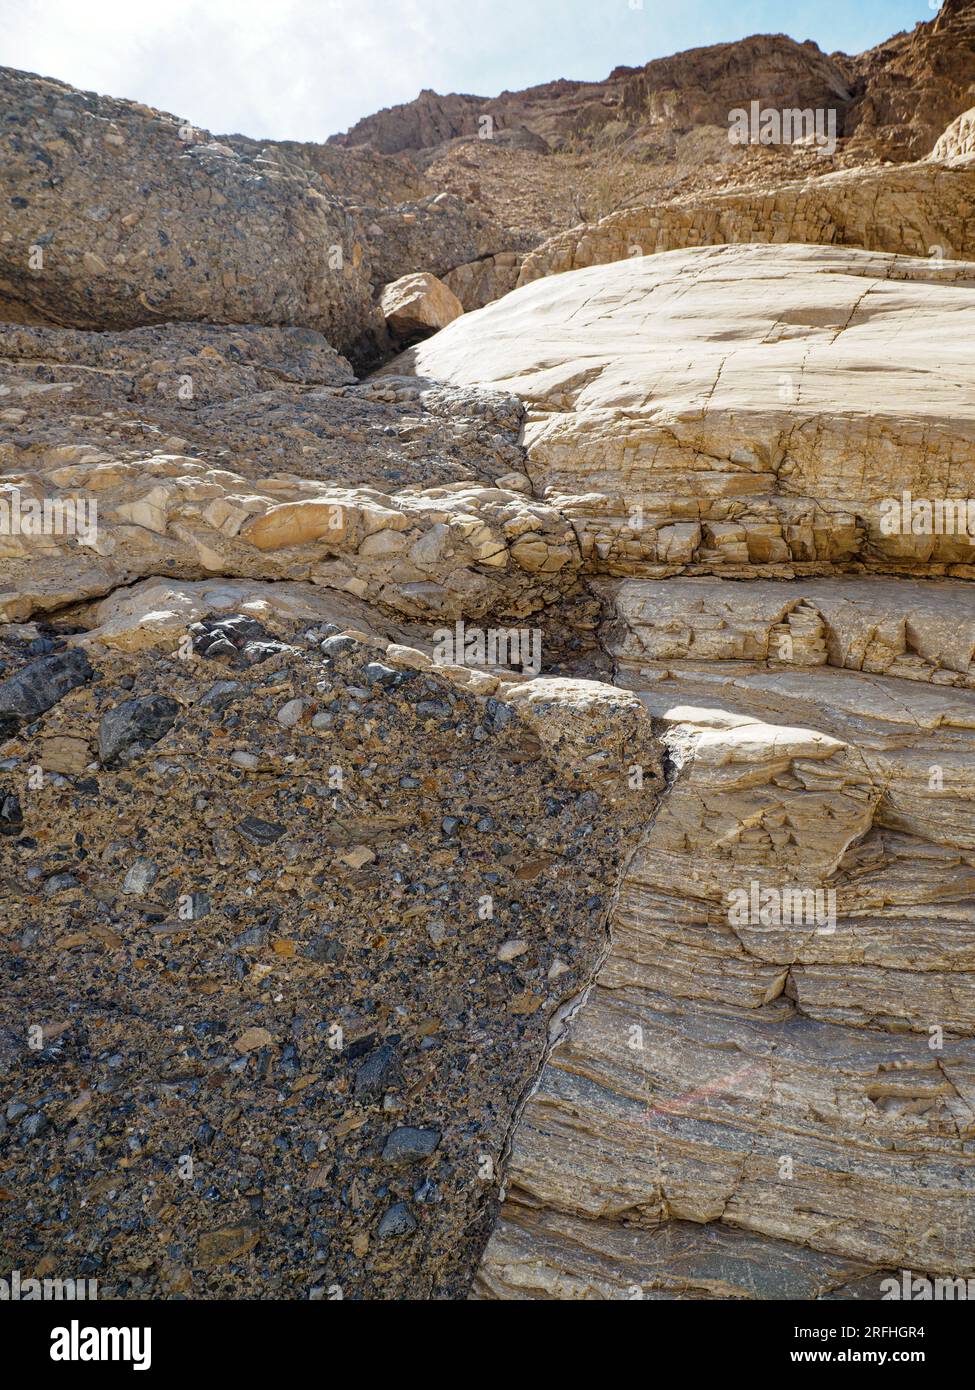 Conglomerate and striated rock detail, Mosaic Canyon Trail in Death Valley National Park, California, USA. Stock Photo